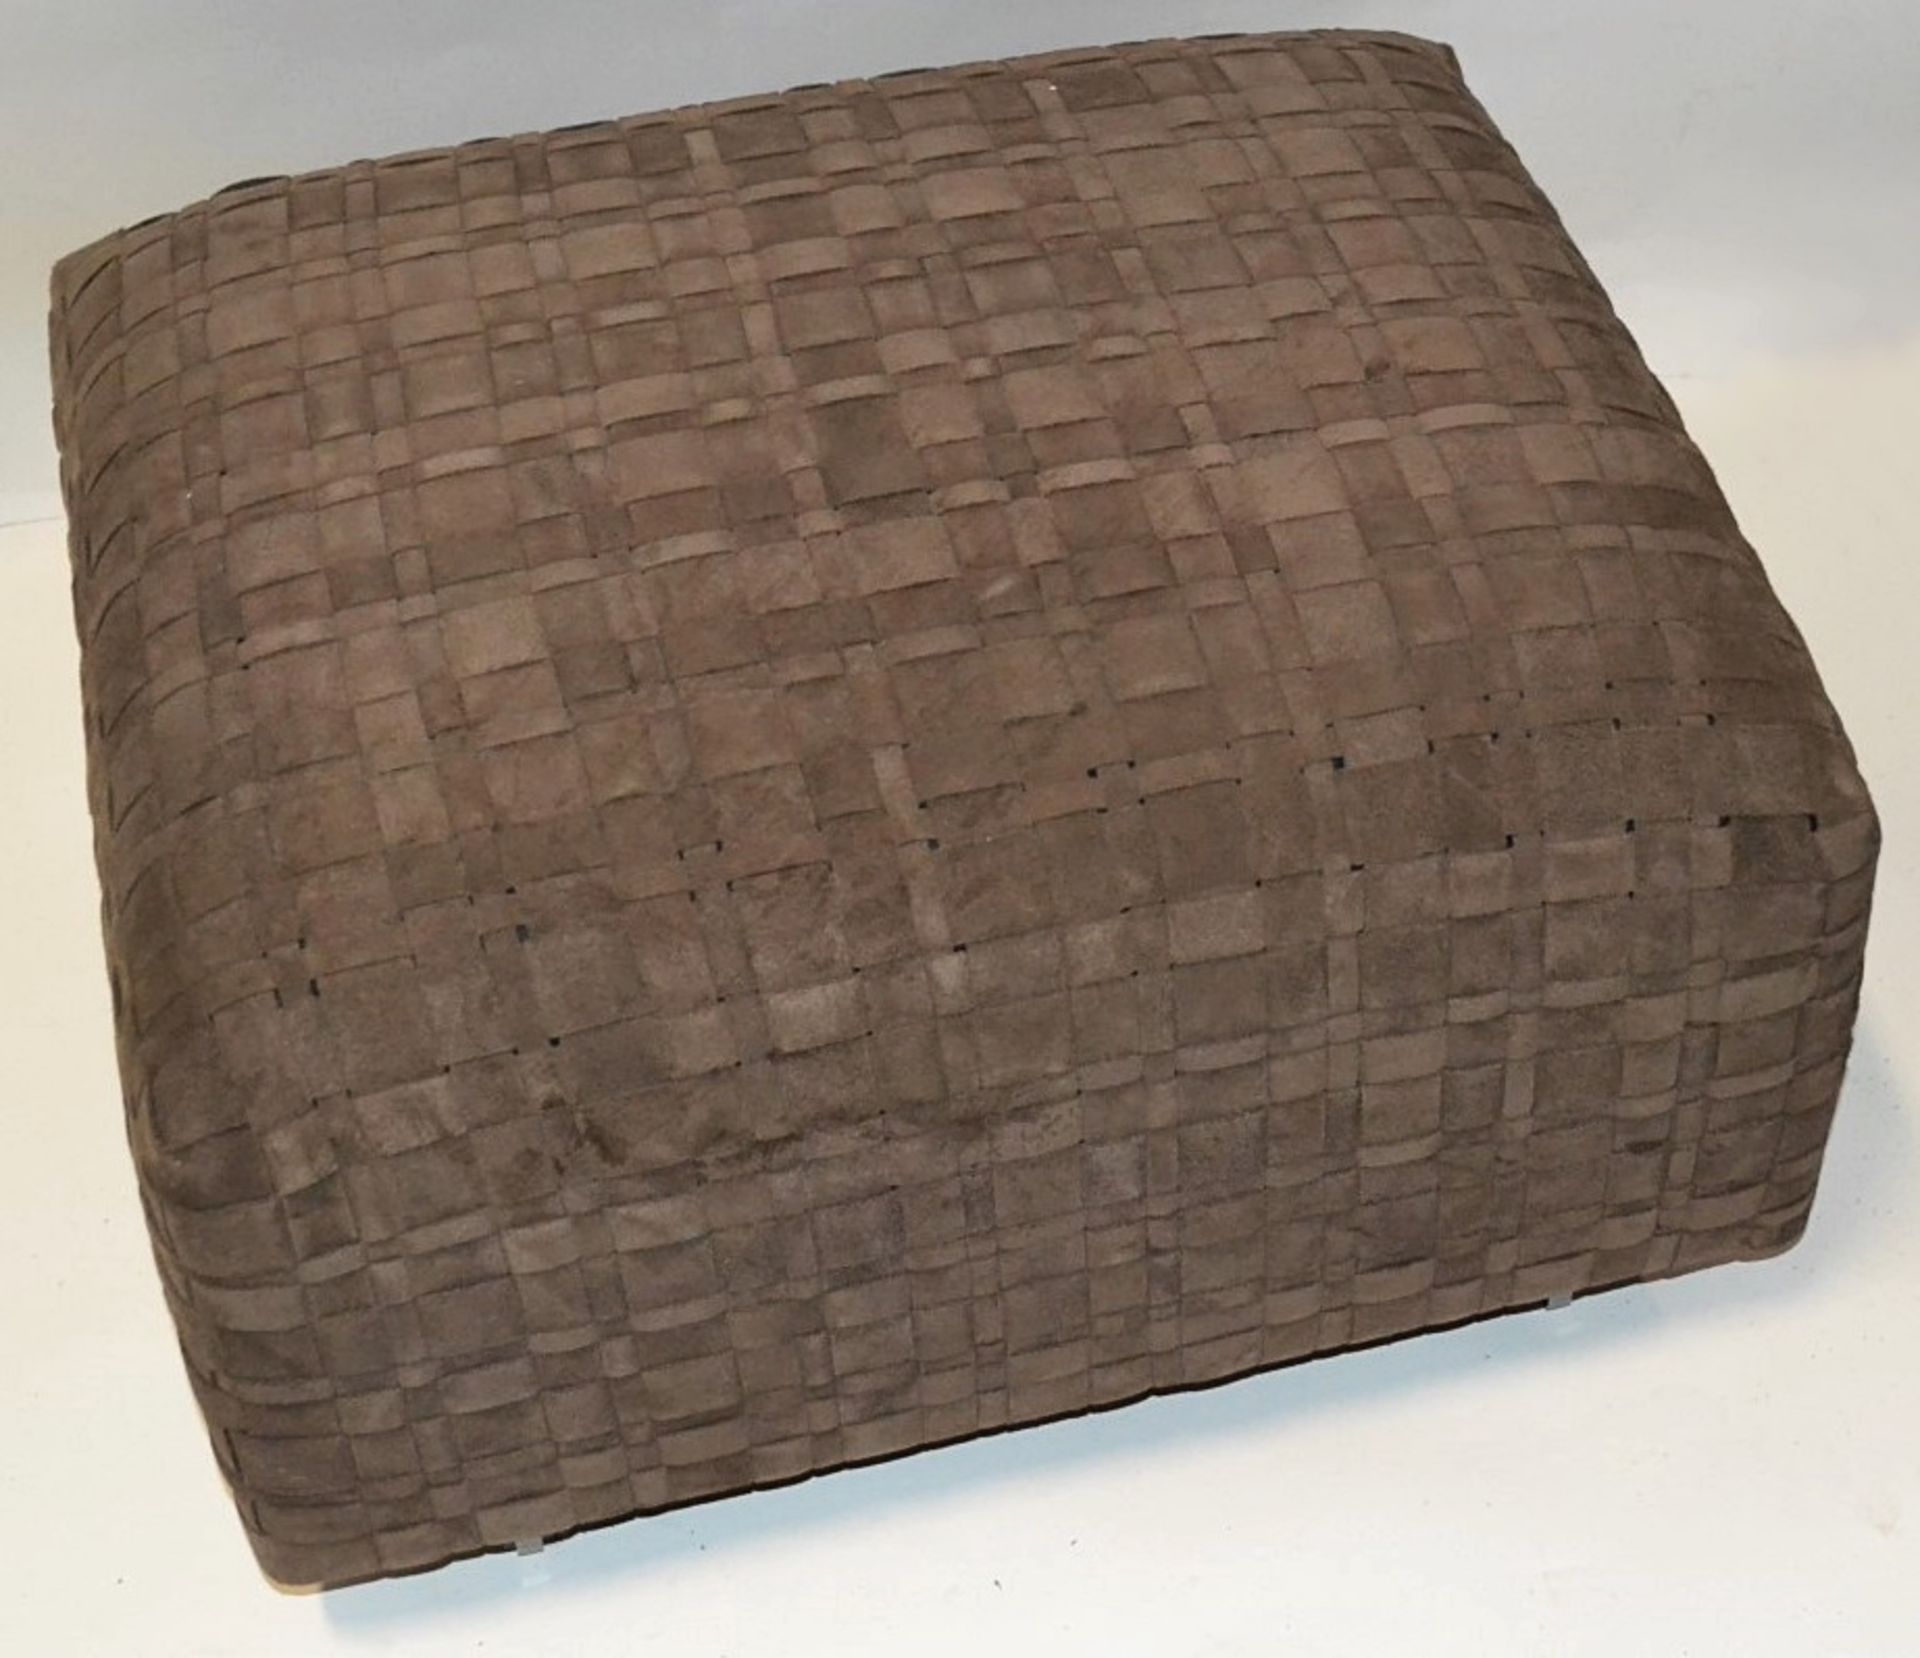 1 x Flexform Bangkok Ottoman - Elegantly Upholstered In Woven Strips of Brown Suede Leather - - Image 2 of 4